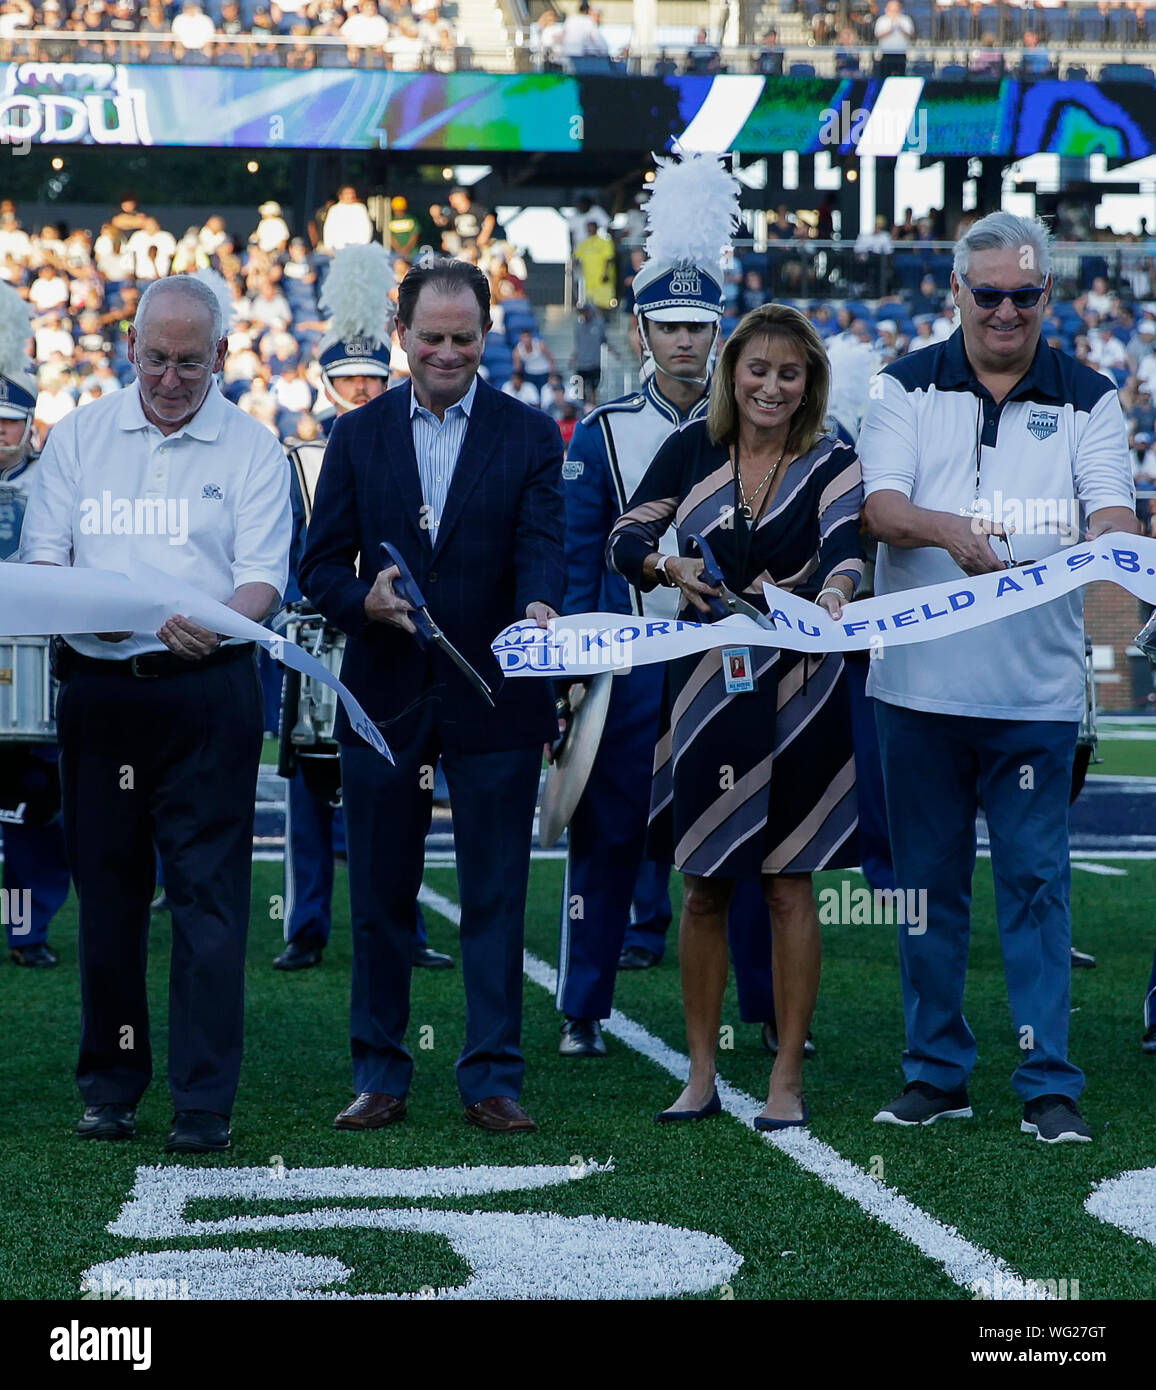 August 31, 2019: ODU President John R. Broderick and his wife, Kate, cut the ribbon for the opening of their new stadium before a NCAA football game between the Old Dominions Monarchs and the Norfolk State Spartans at S.B. Ballard Stadium in Norfolk, VA. Justin Cooper/CSM Stock Photo